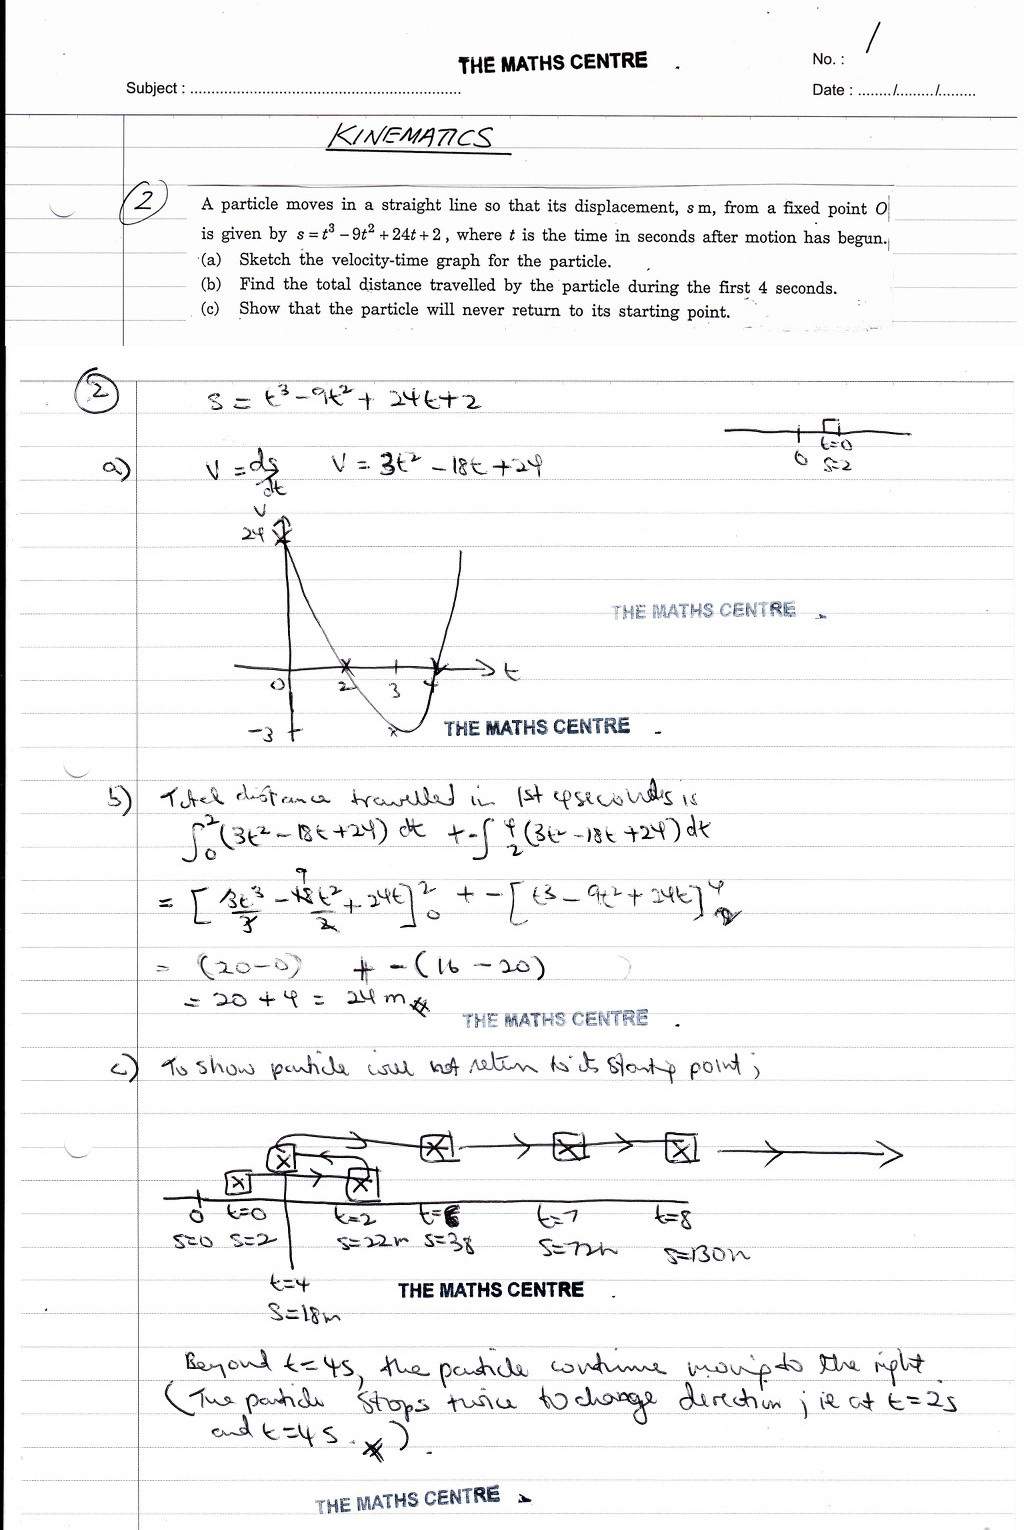 Kinematics Practice Problems Worksheet Kinematics Igcse Year 11 Revision Questions the Maths Centre